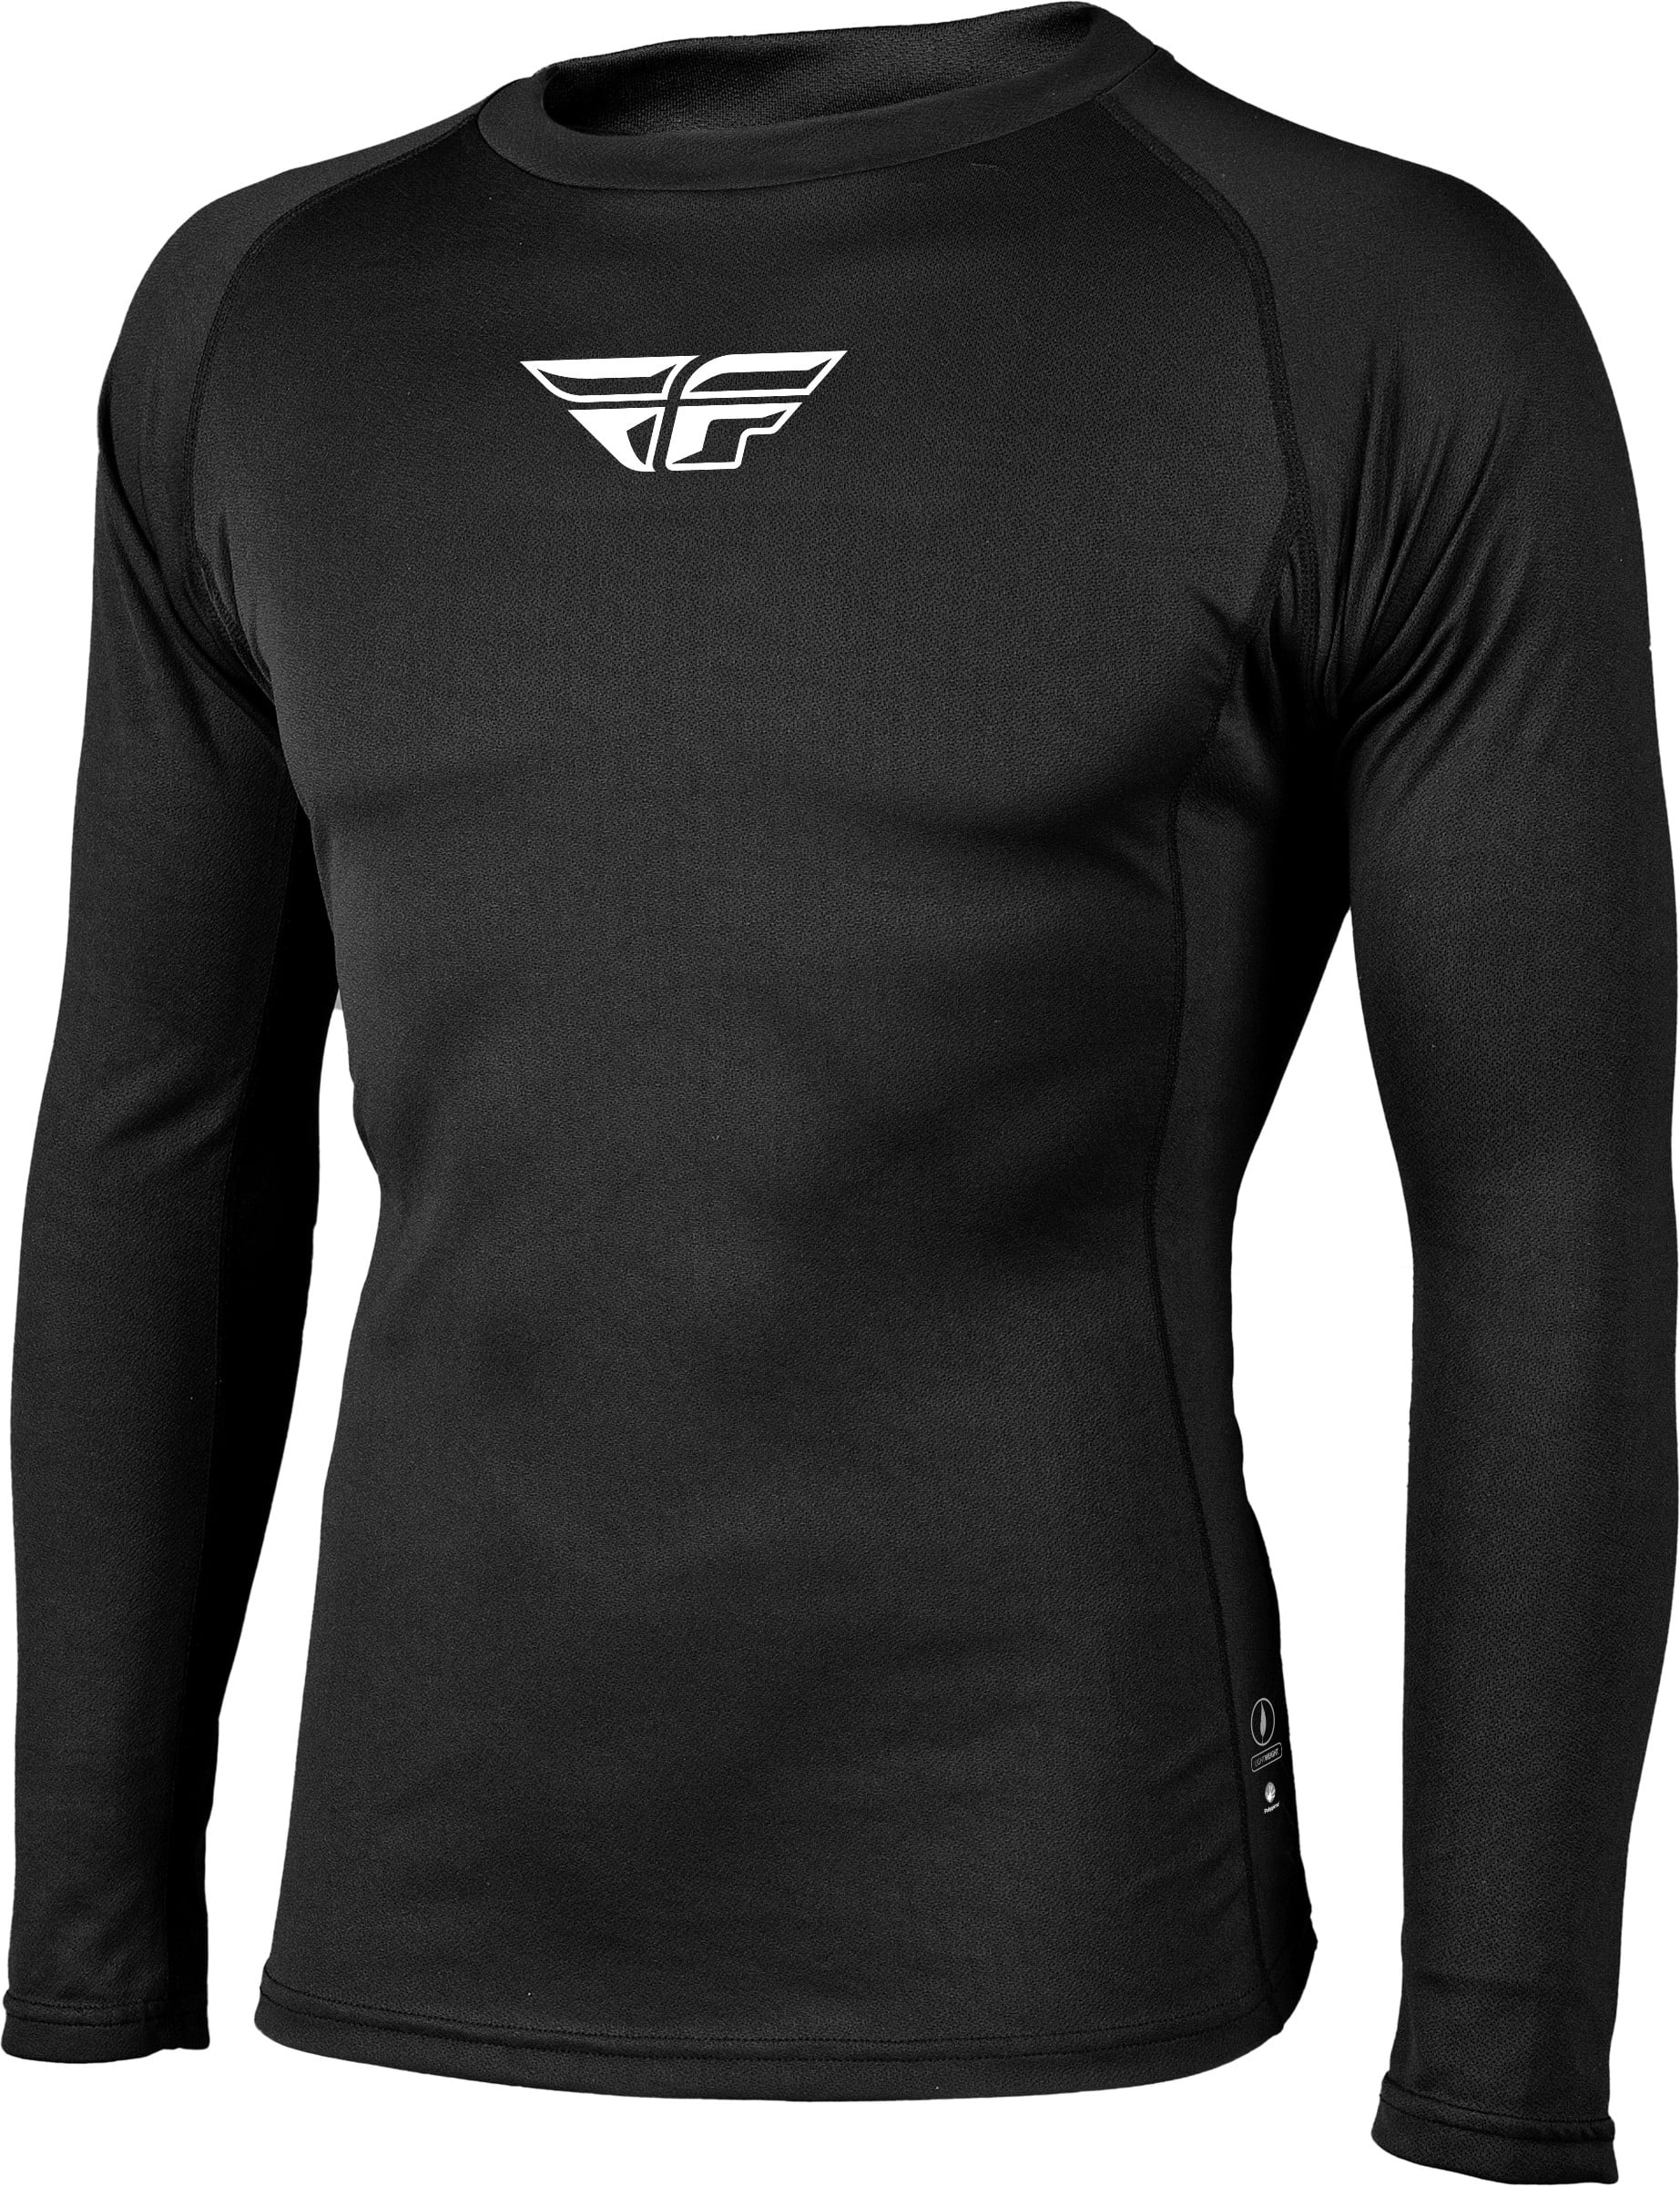 2X-Large Fly Racing Lightweight Adult Off-Road Motorcycle Undergarment Base Layer Top Black 